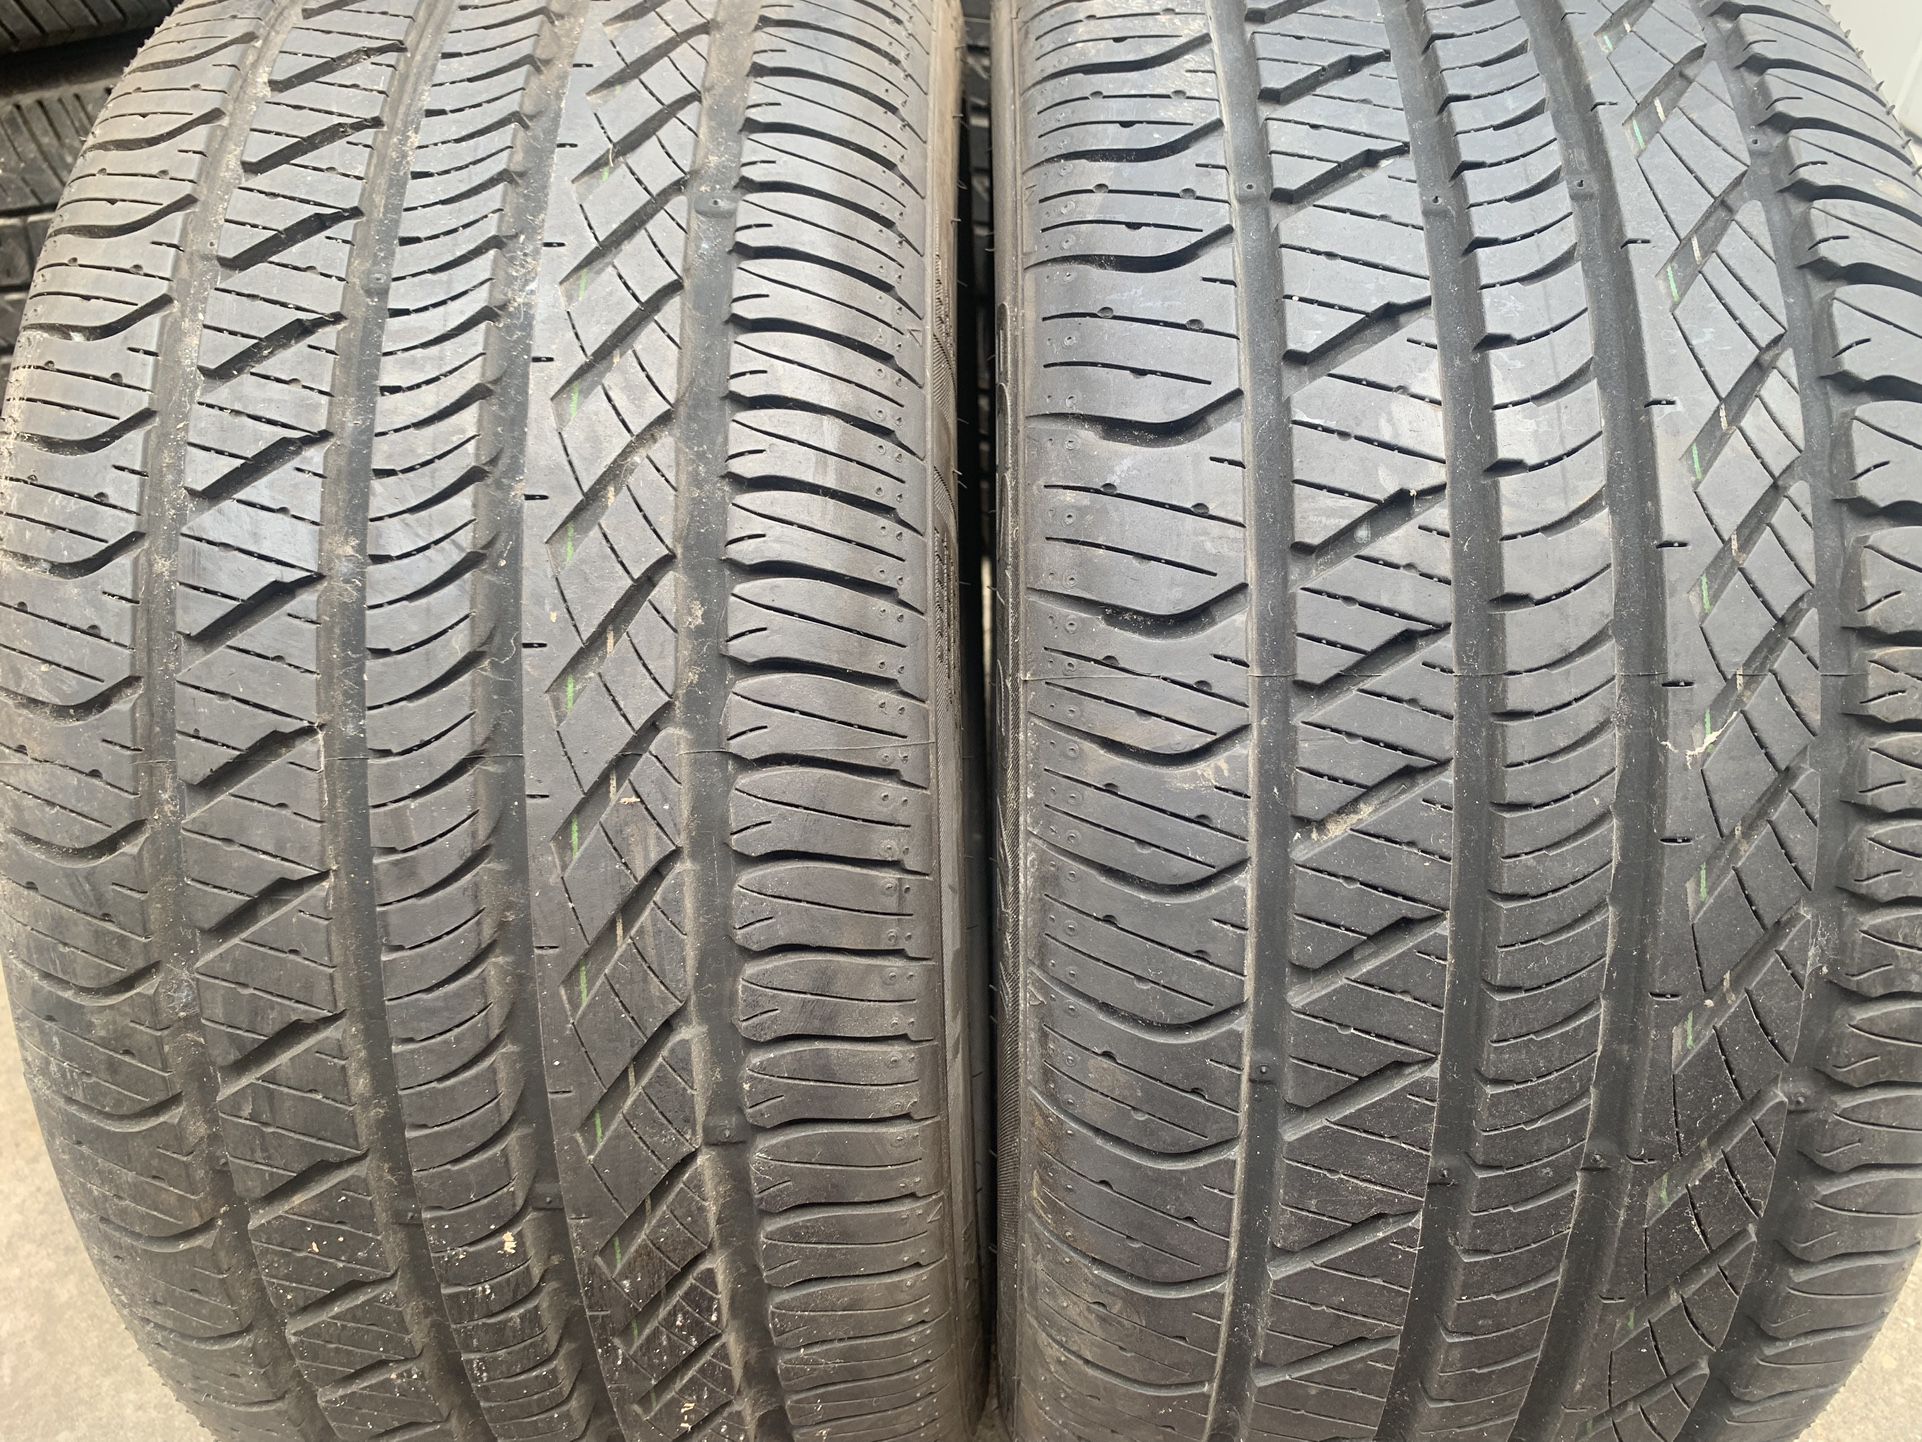 Tires Set Of 2 kumho ecsta 4XII 245/40R18 They  Are New No Nail Or Damage Just Removed Stickers Life 100%Ablo Español I Do Auto Repair As Well Text @ 